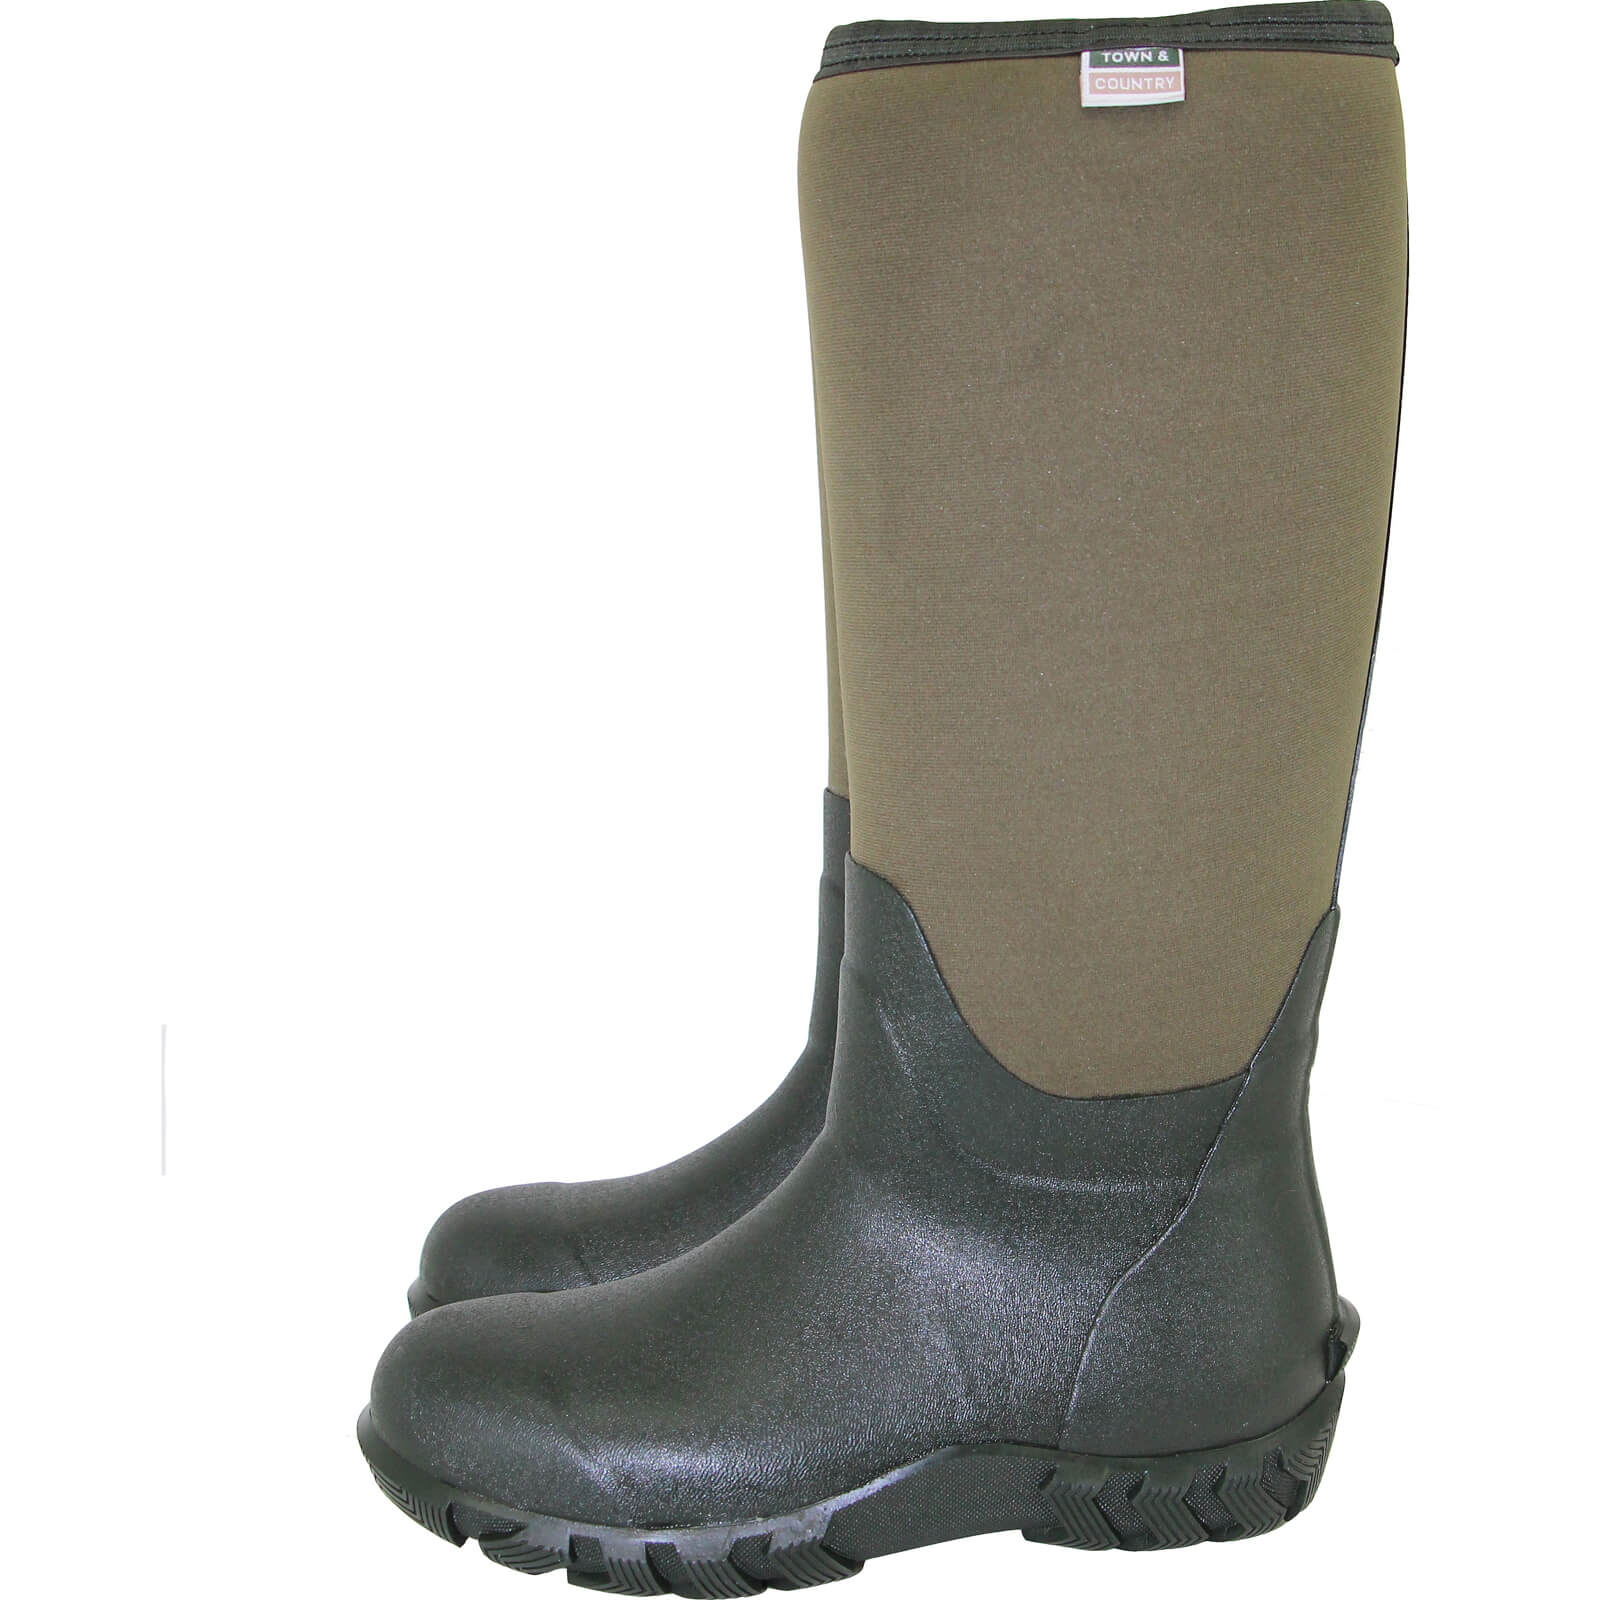 Image of Town and Country Buckingham Rubber Wellington Boots Green Size 8